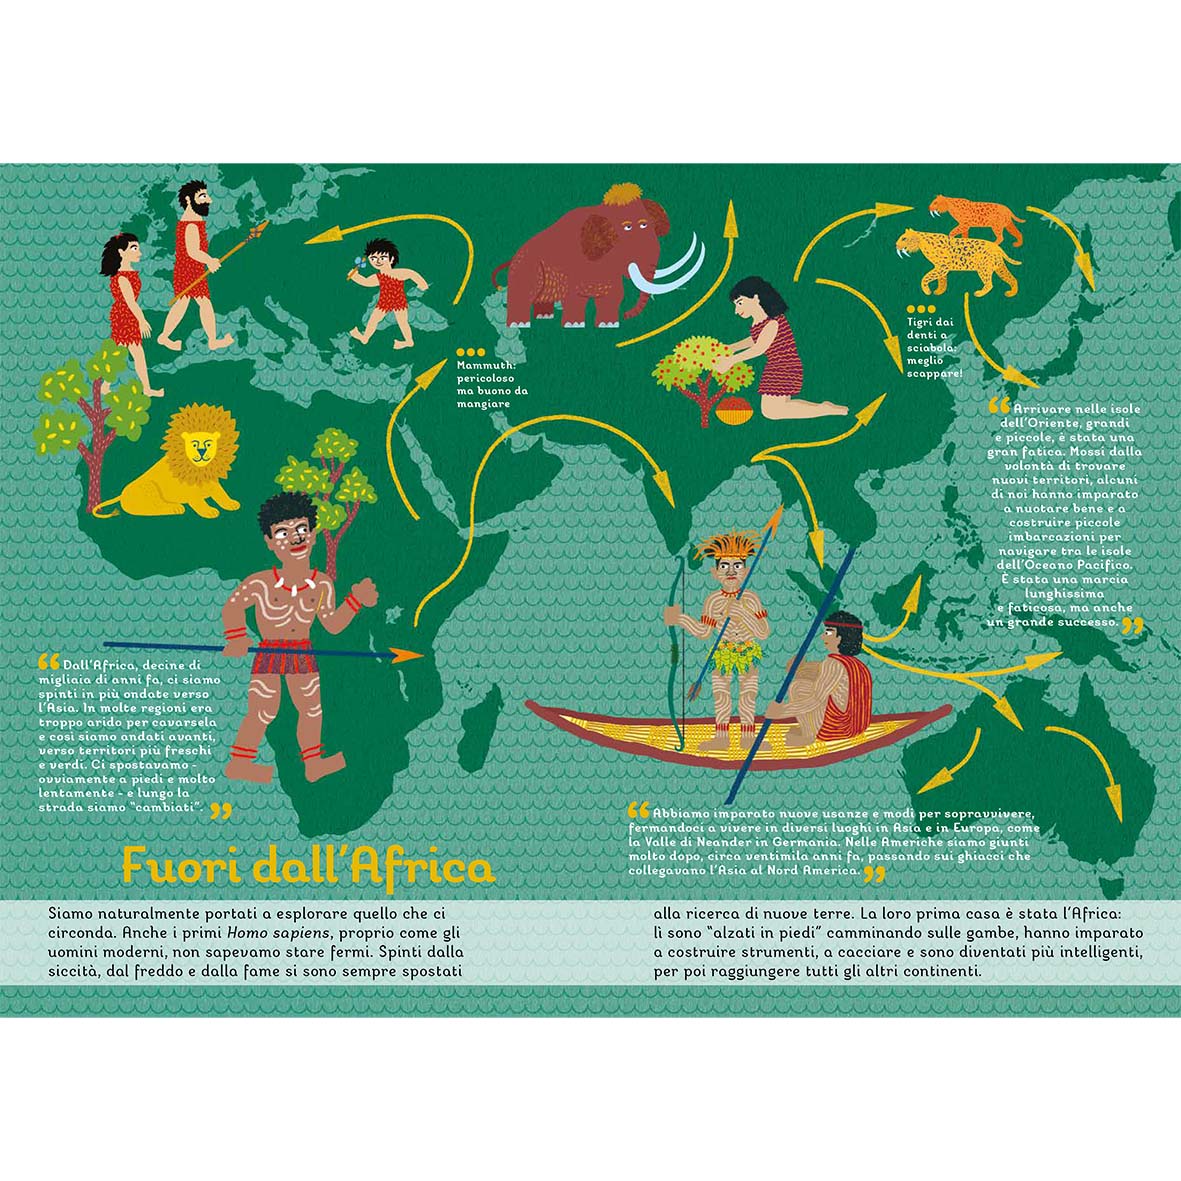 The atlas of explorations - Men and women discovering the world and the universe